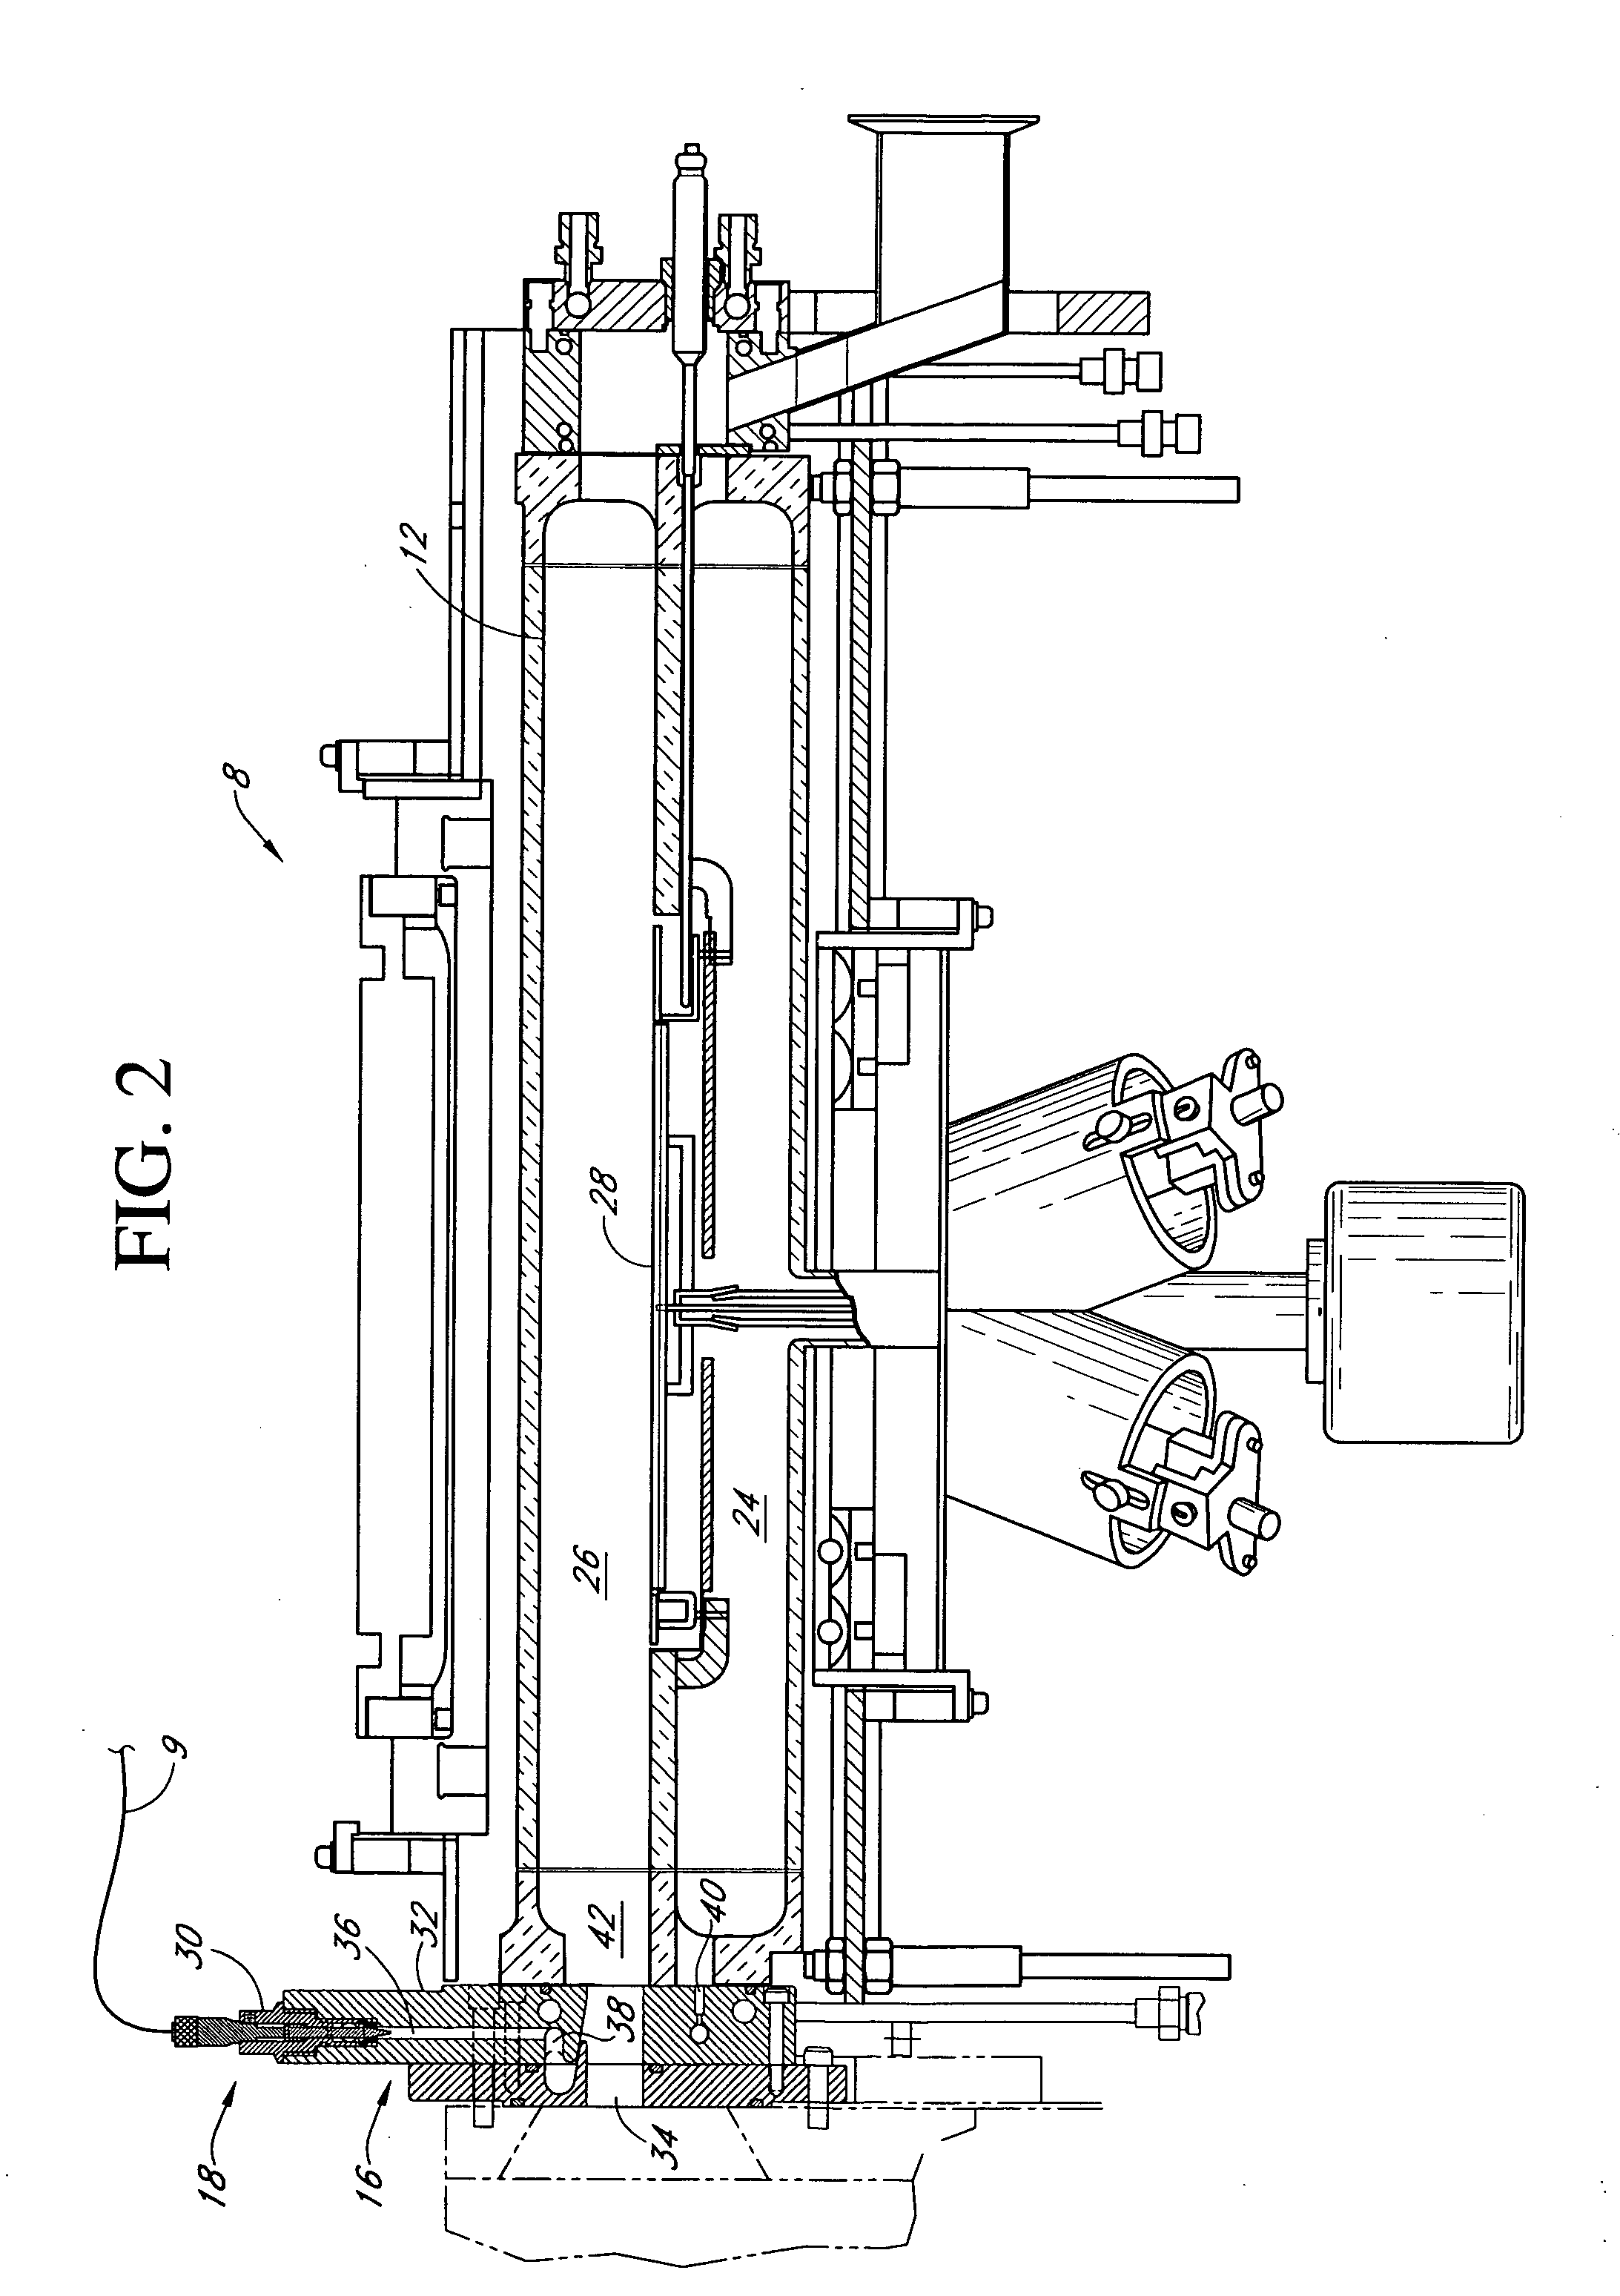 System for control of gas injectors